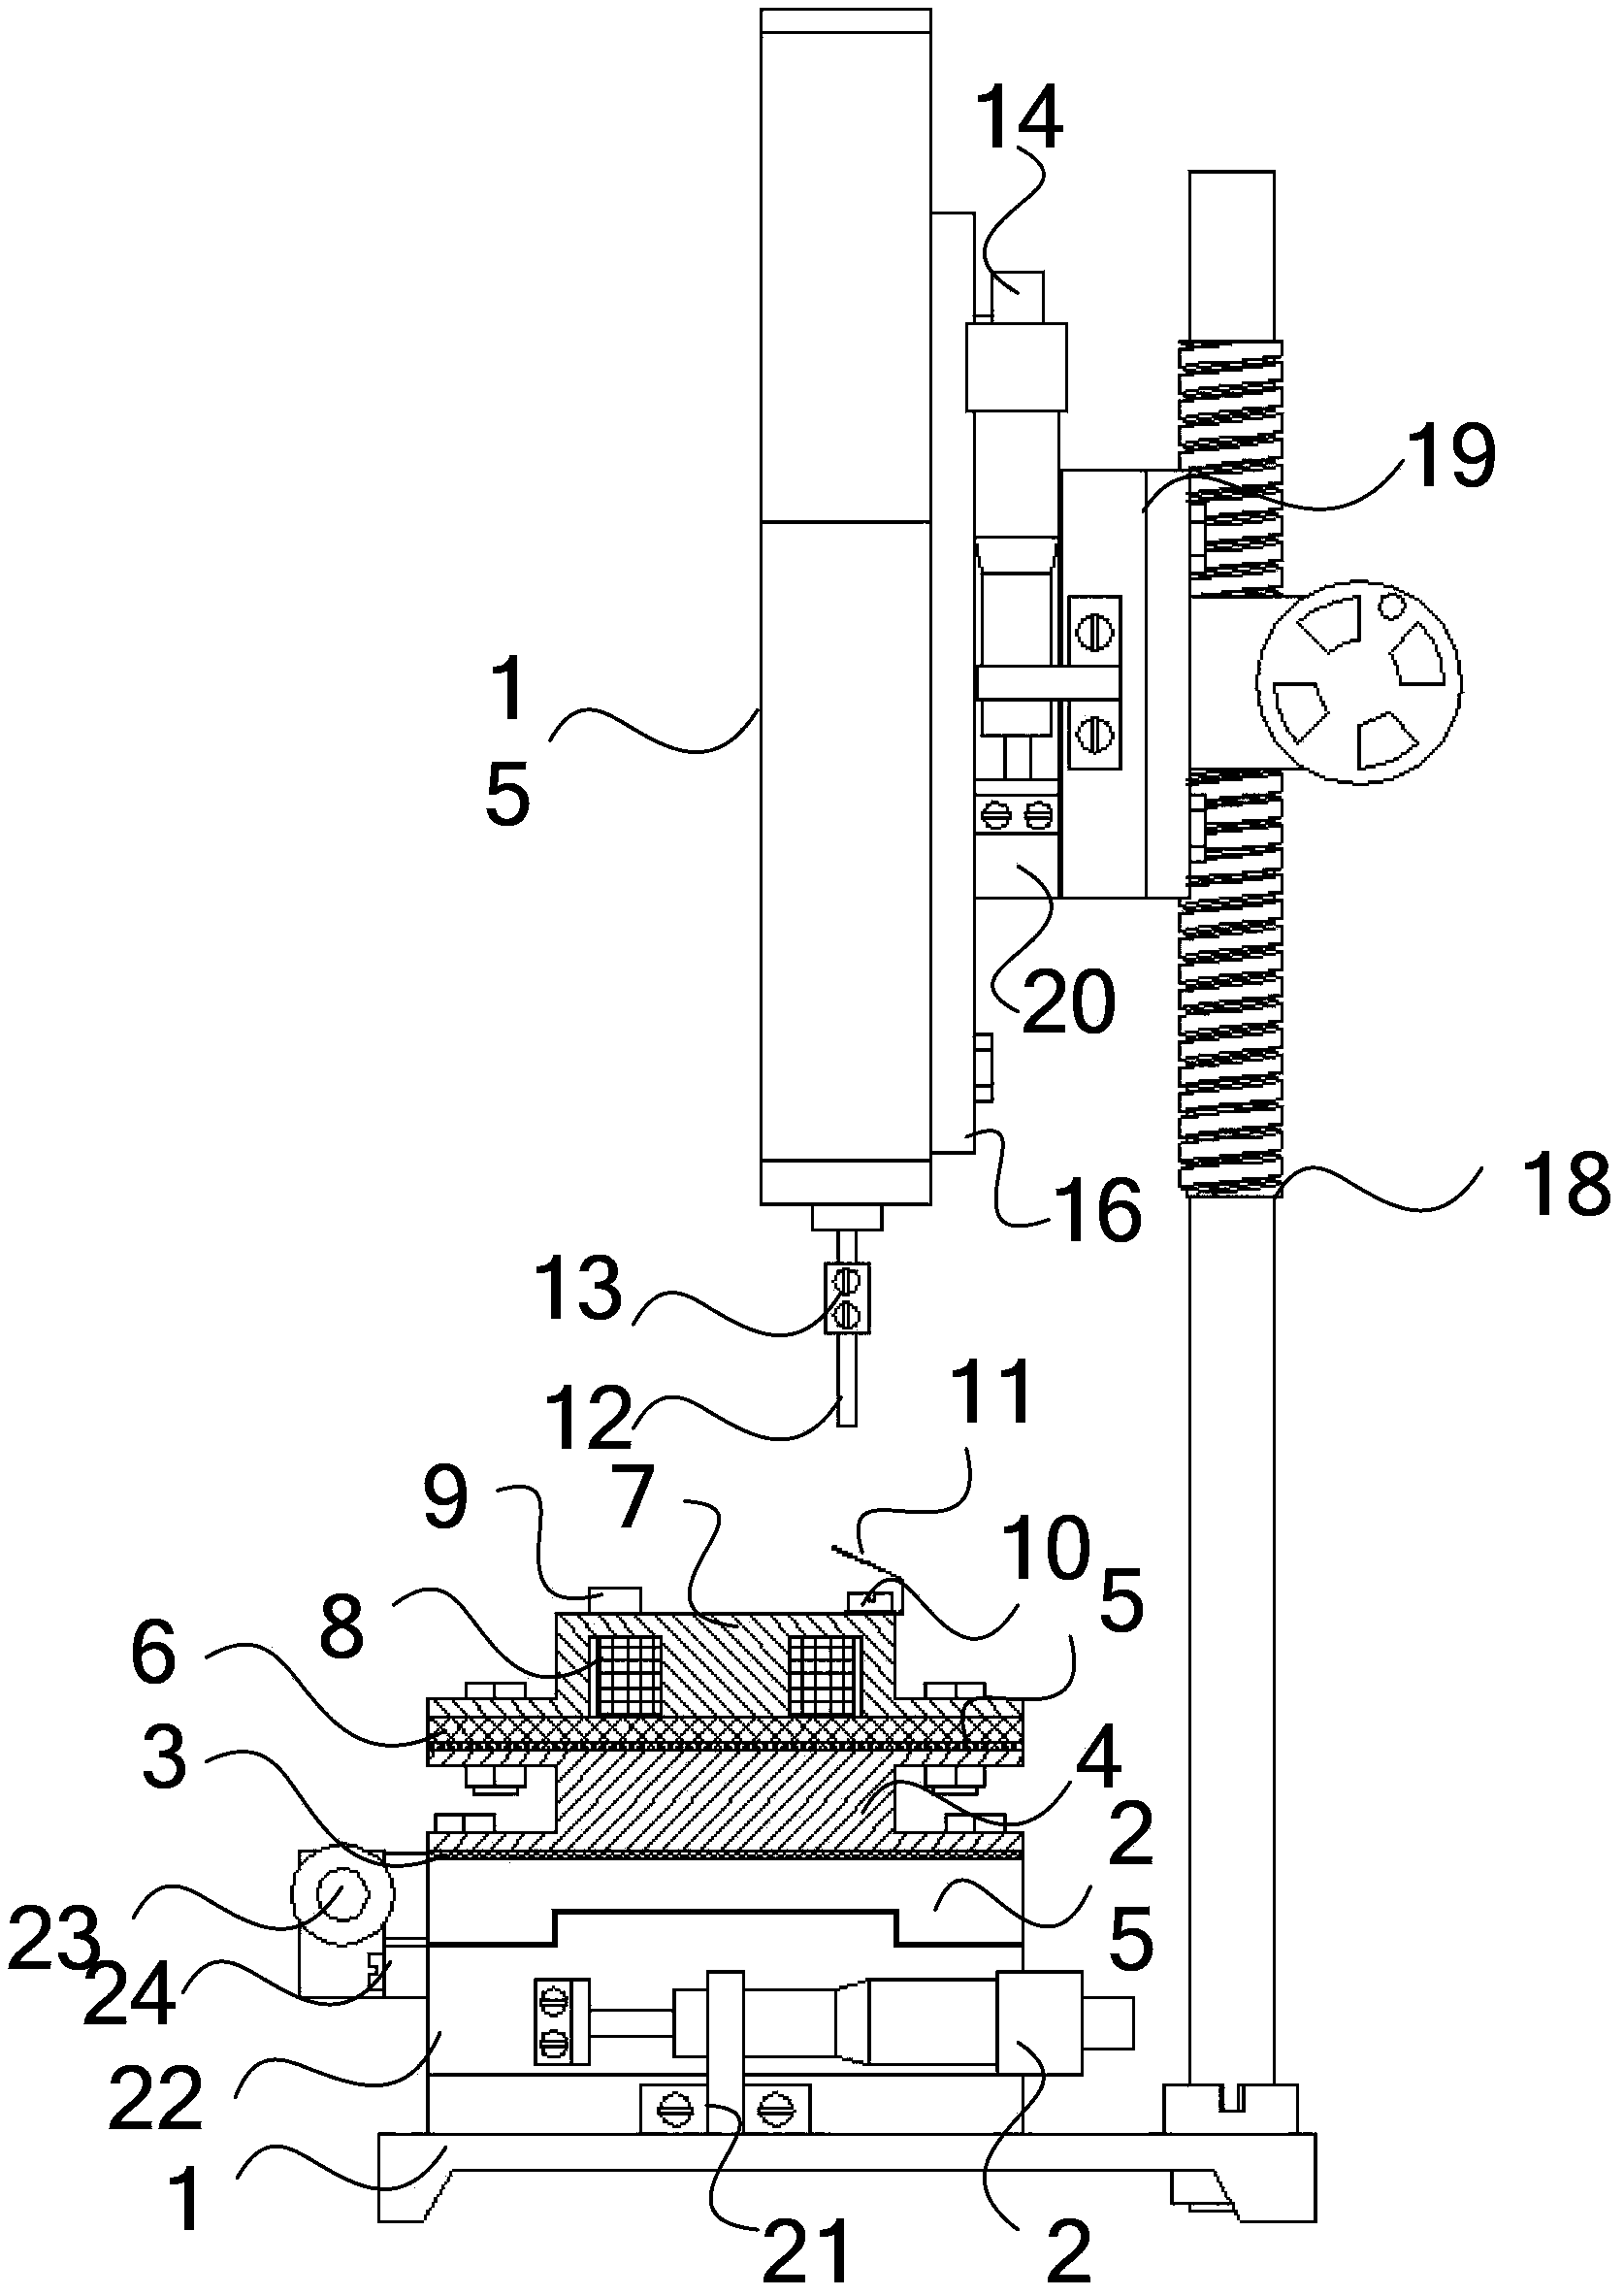 Device for testing rigidity of plate spring in high-temperature environment